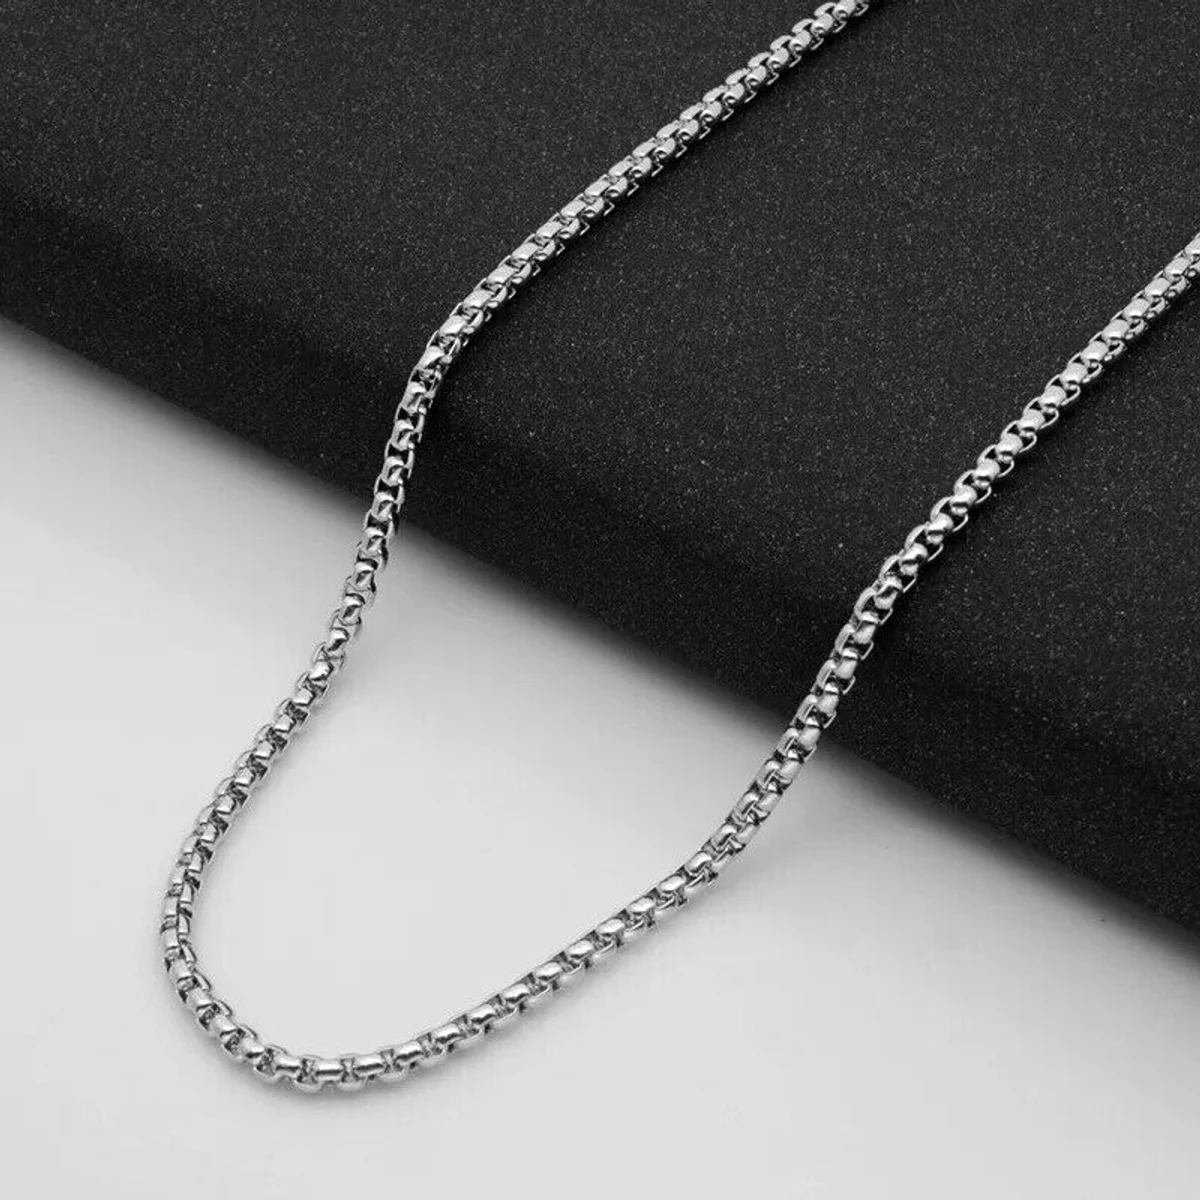 Round Rofe Link Stainless Steel Necklace Chain For Men Rofe Chain